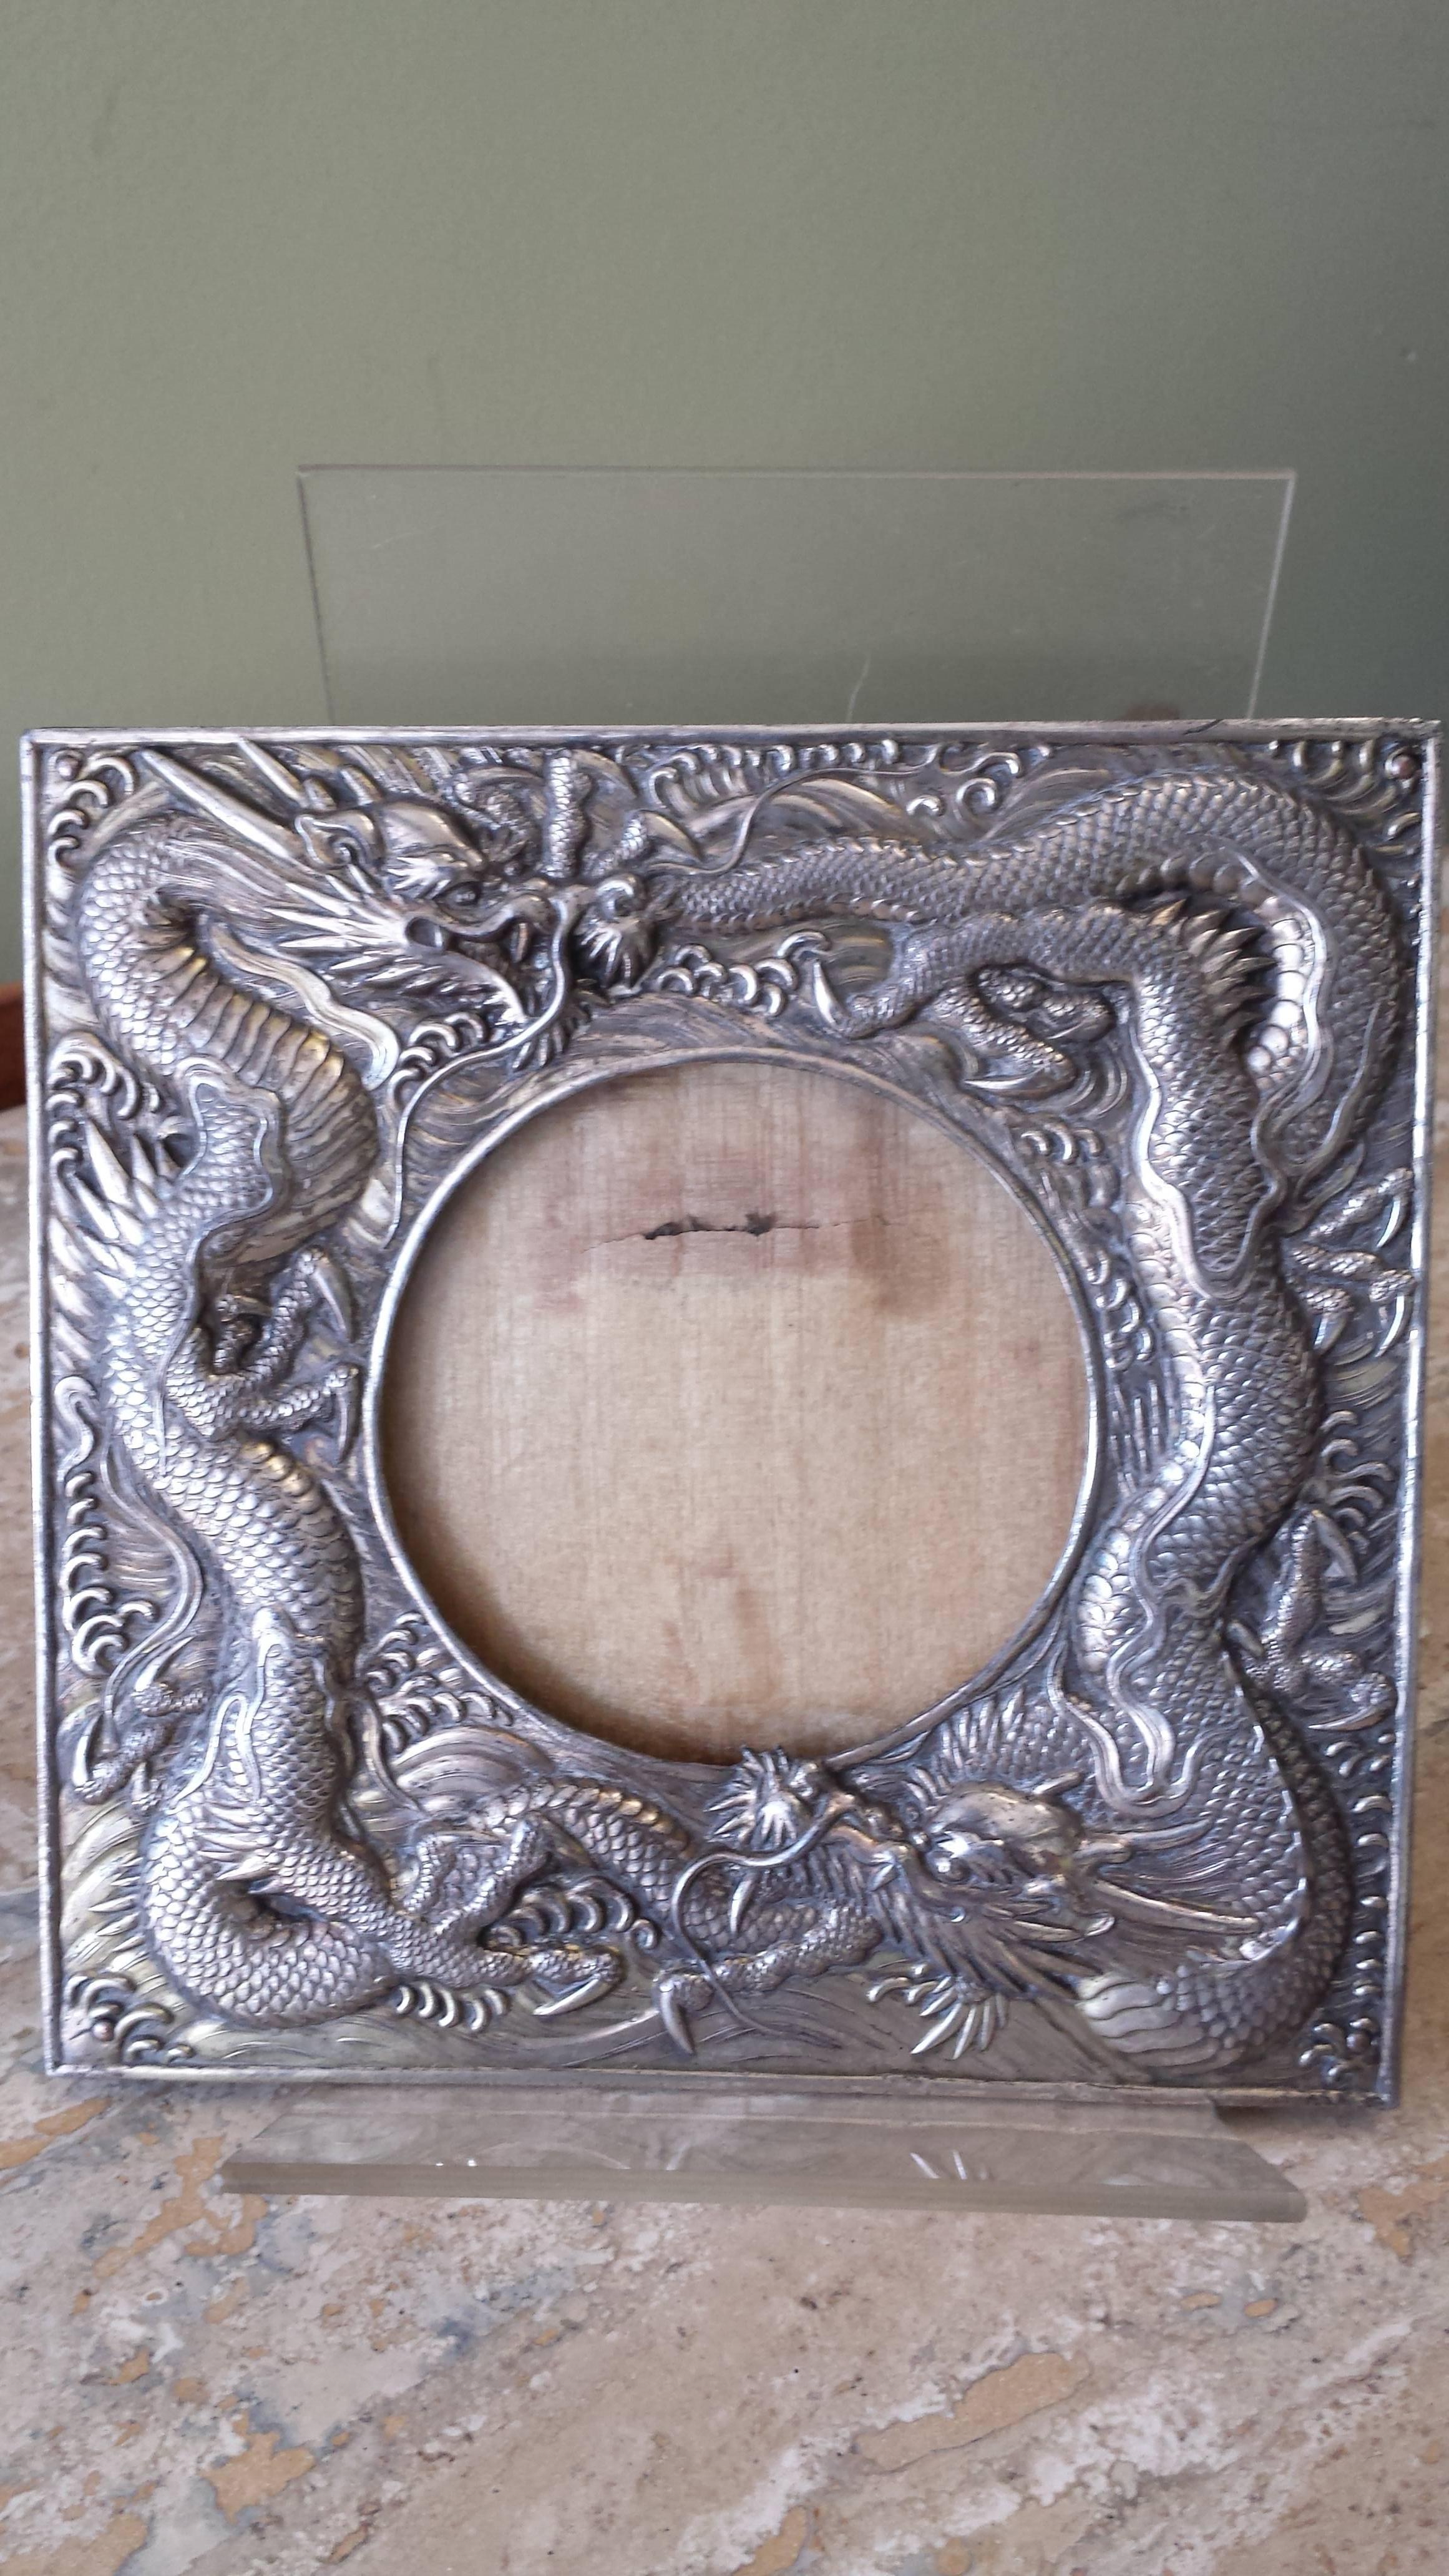 Metal Stunning Double Dragon Picture Frame in a Silver/Gilt Old Finish circa 1900-1910